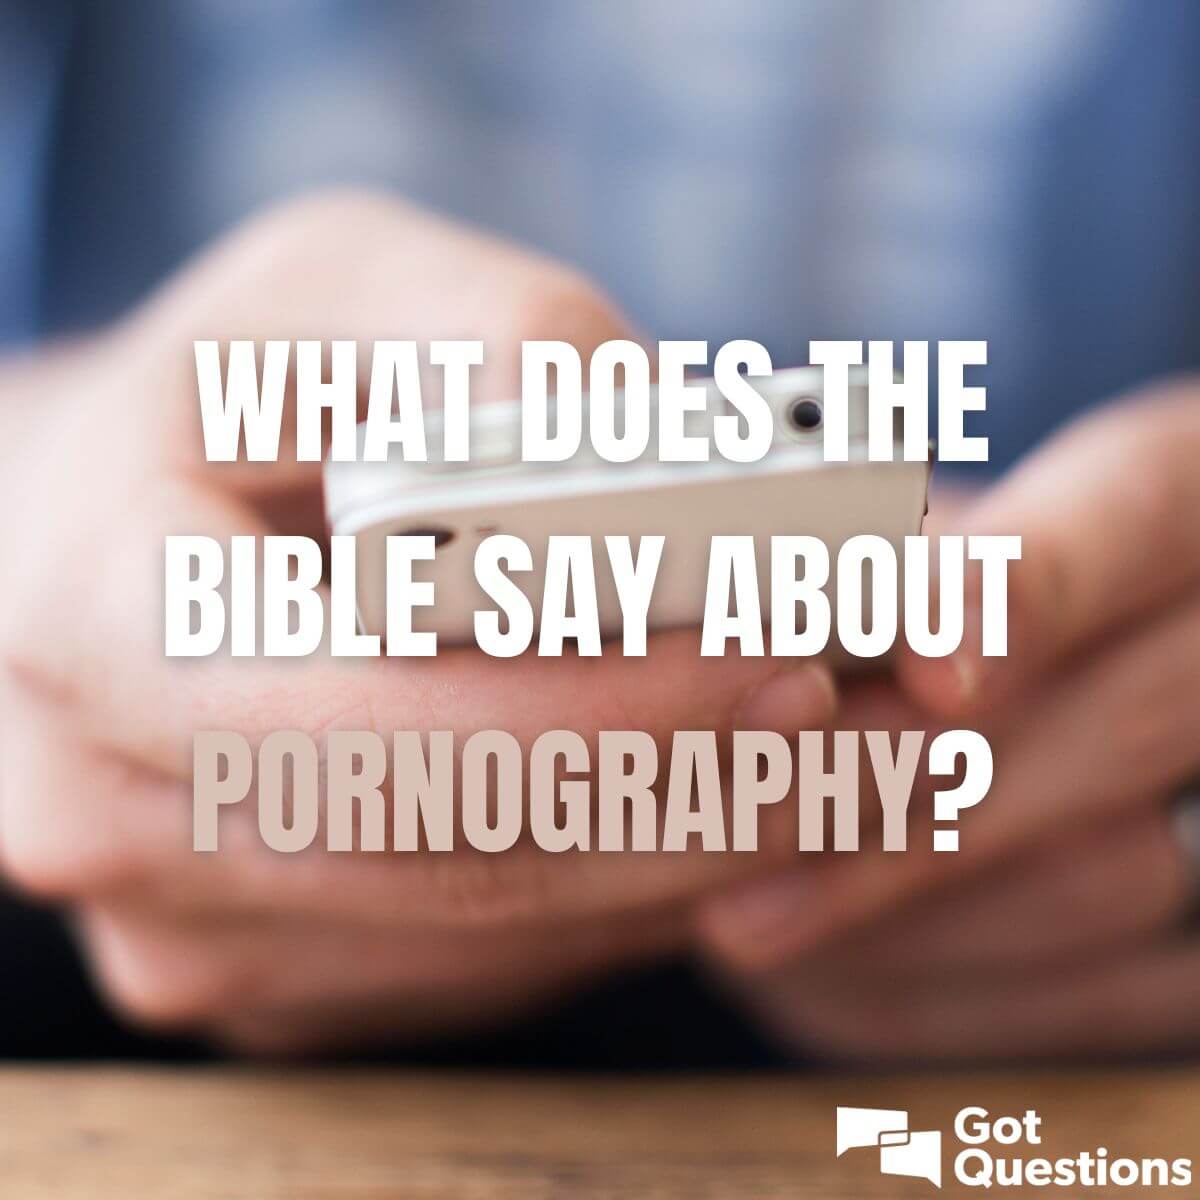 Bible Verses Porn - What does the Bible say about pornography? | GotQuestions.org